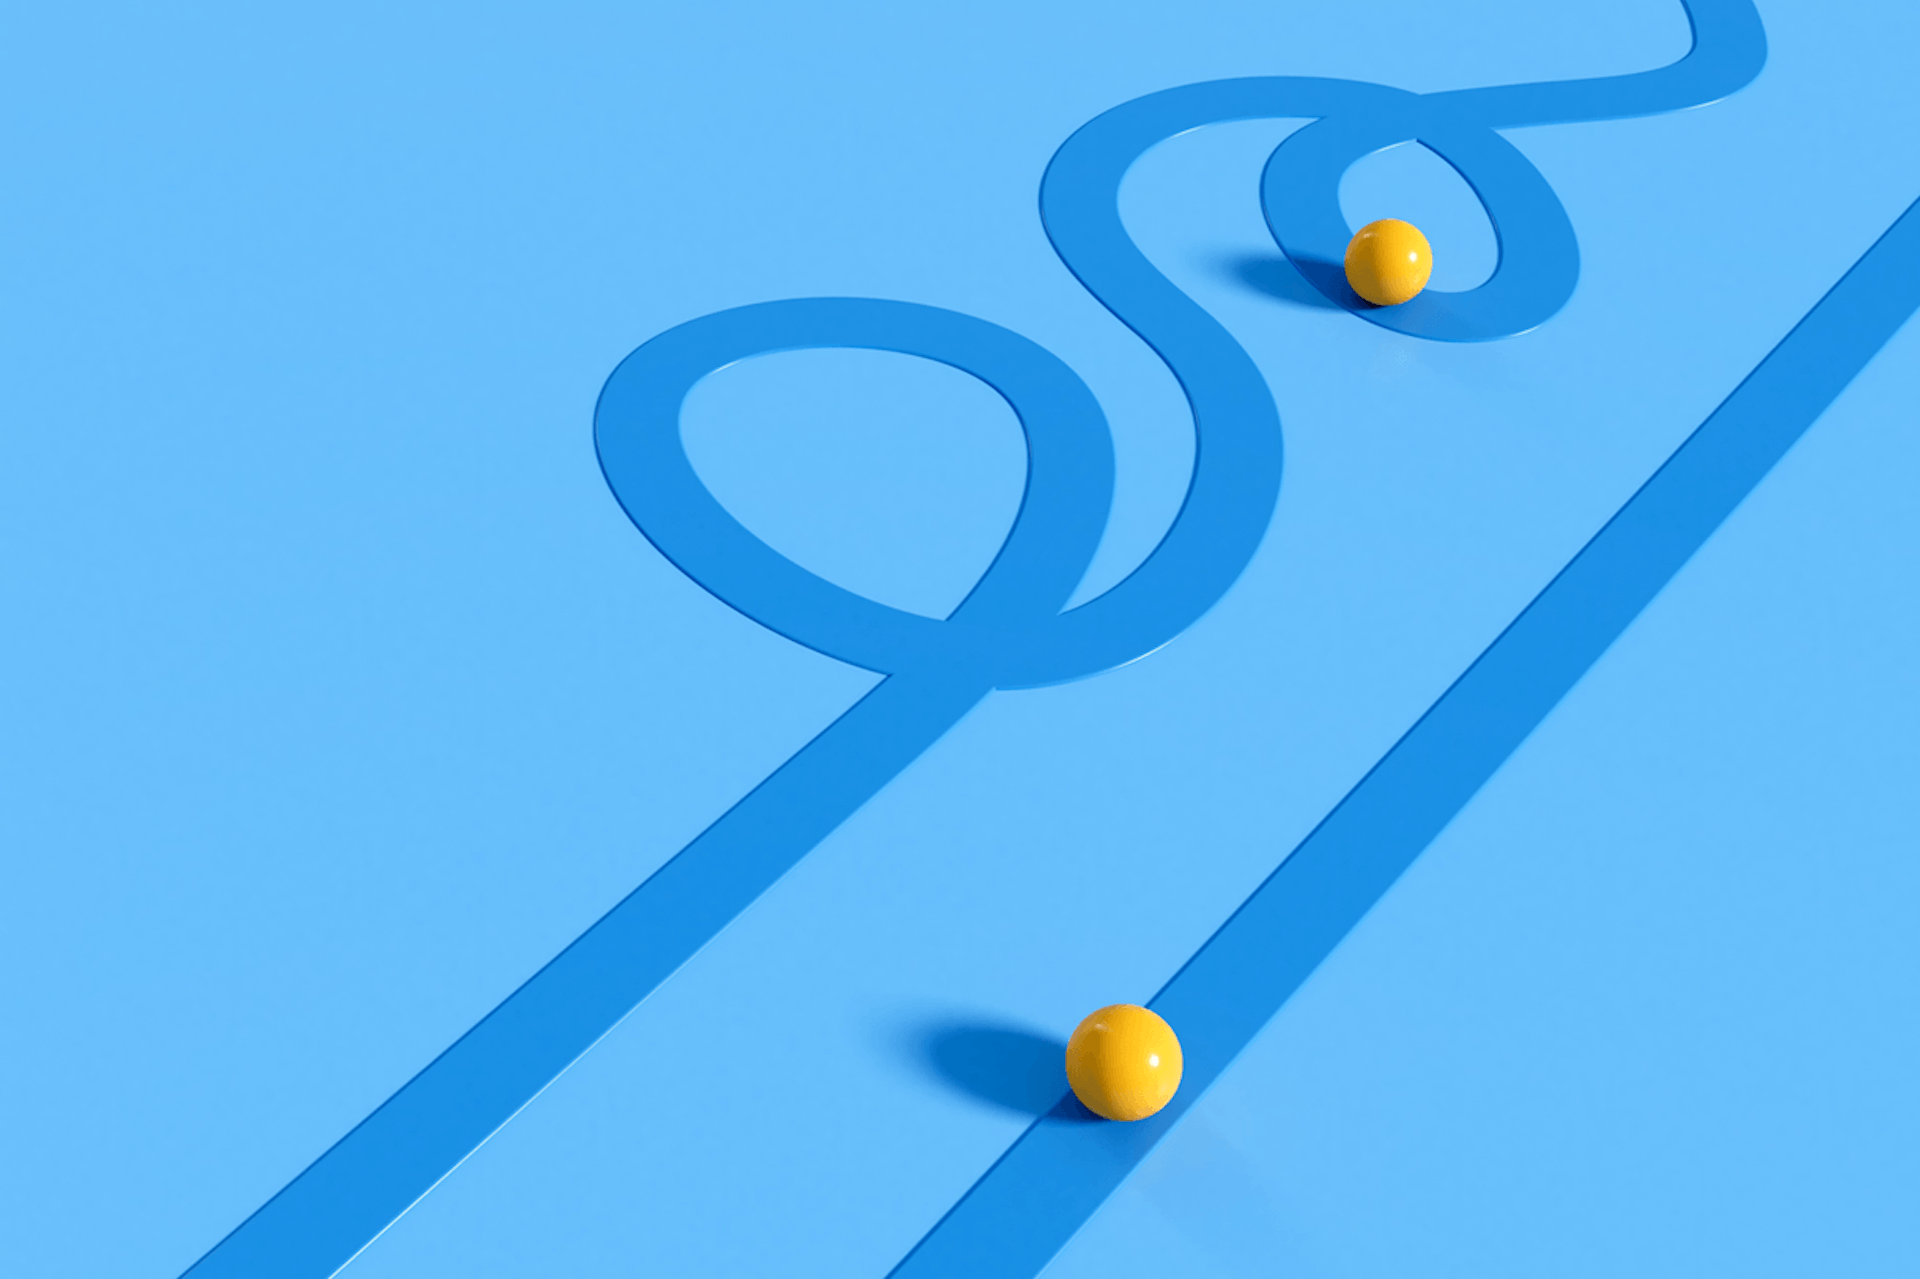 An image showing two dark blue lines on a lighter blue background. One line is straight and the other is loopy, crossing over itself. On each line there is a three dimensional bright yellow dot, signifying their place in a journey. This image is a header on a blog post about designing a customer journey and maximizing success.